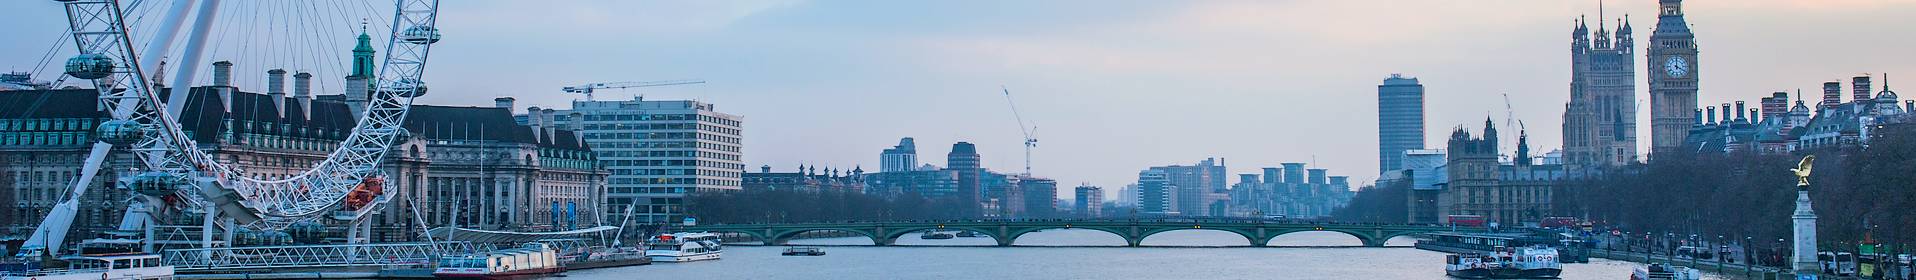 View of river Thames buildings